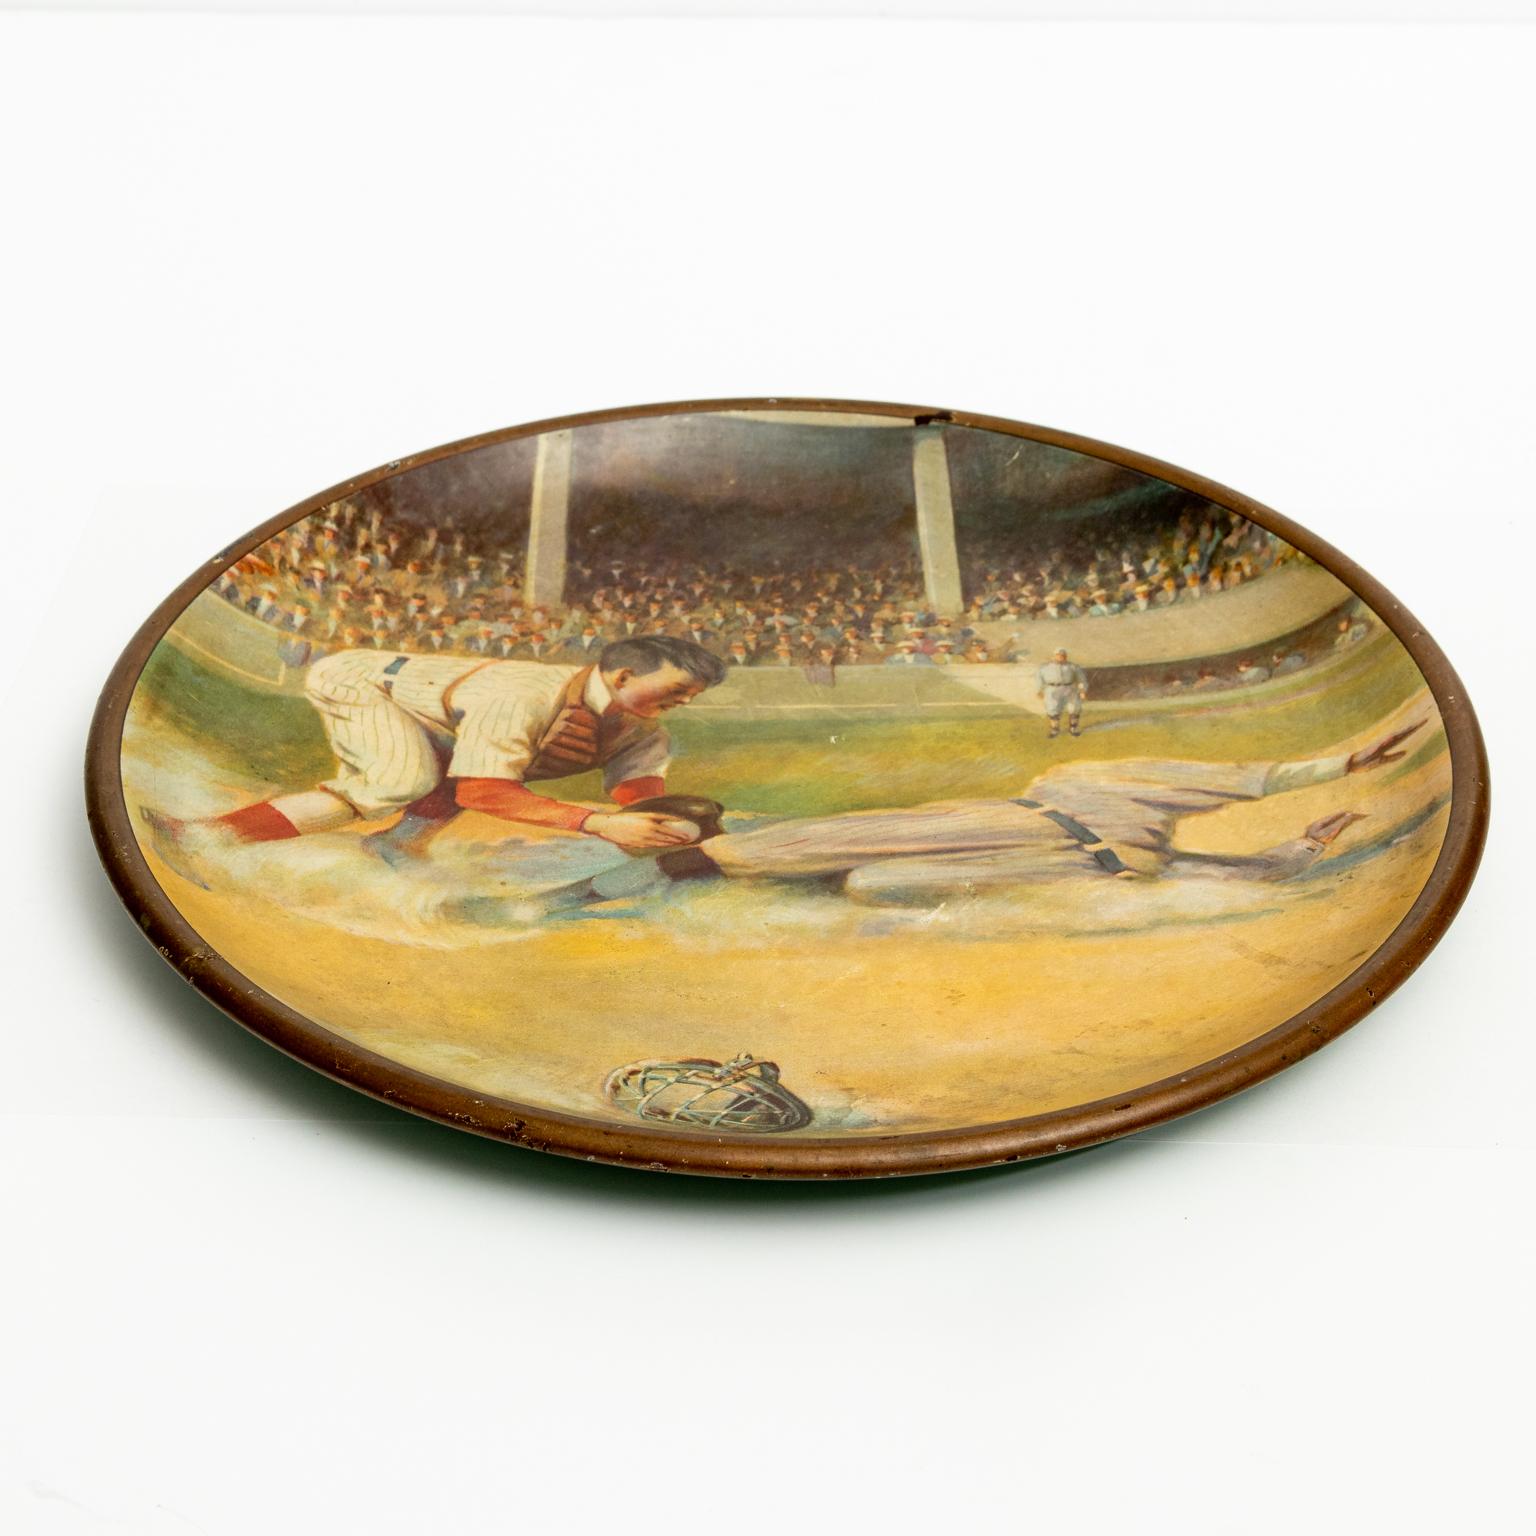 Circa 1920s collectible 10.00 Inch diameter Vienna tin art plate depicting a baseball game with a player sliding into base with the catcher. In the image's background is a stadium of fans wearing hats consistent with the 1920s era. There are no